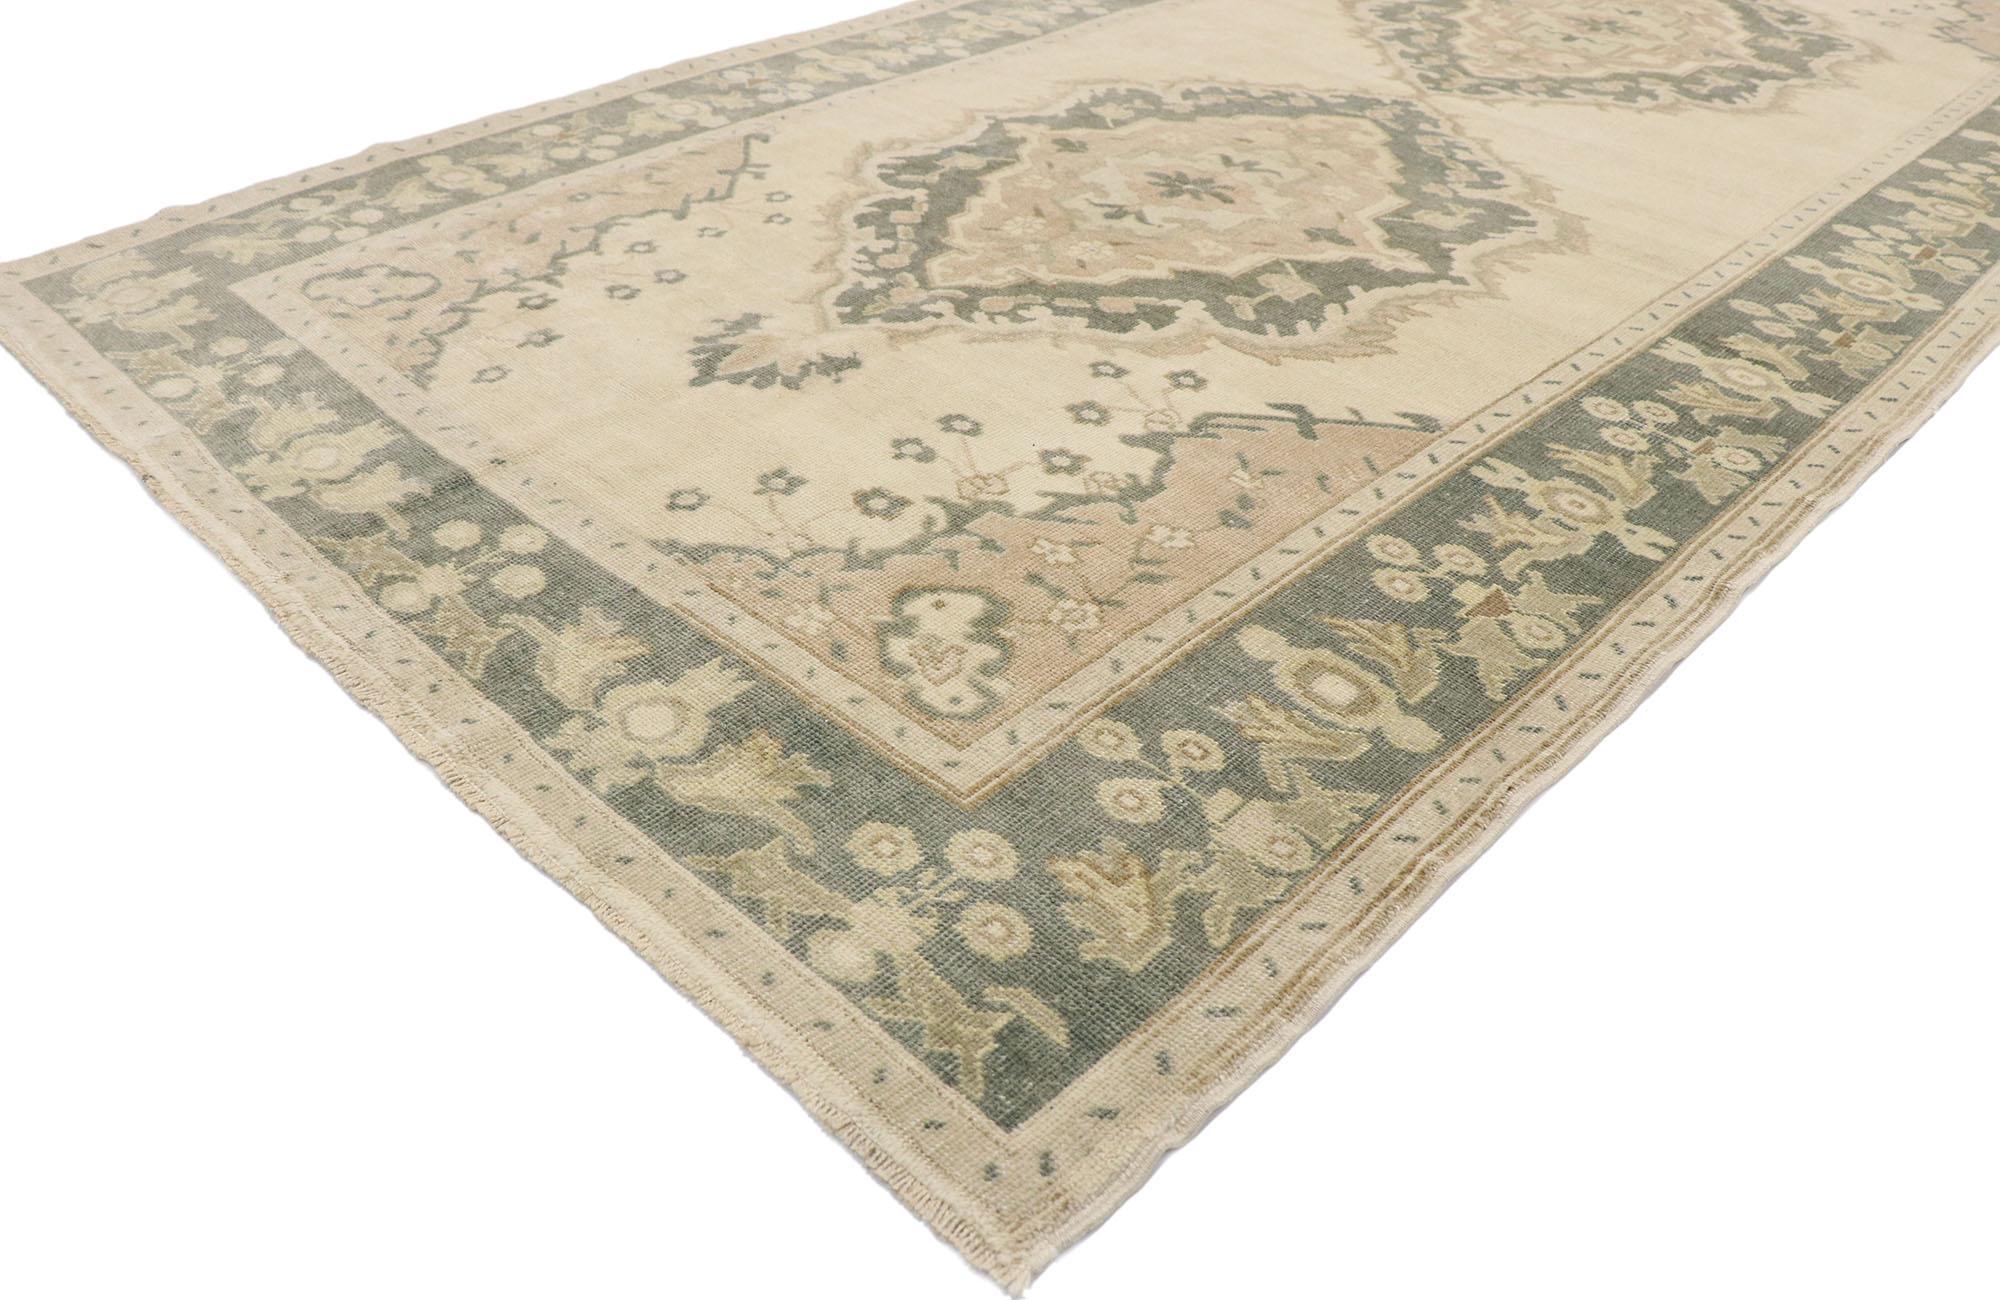 53524, vintage Turkish Oushak runner with romantic Swedish Rococo style 05'01 x 10'04. Take a timeless, tailored design, mix in a dash of romantic connotations and antique-washed colors to get this fresh look that’s as comfortable as it is chic.